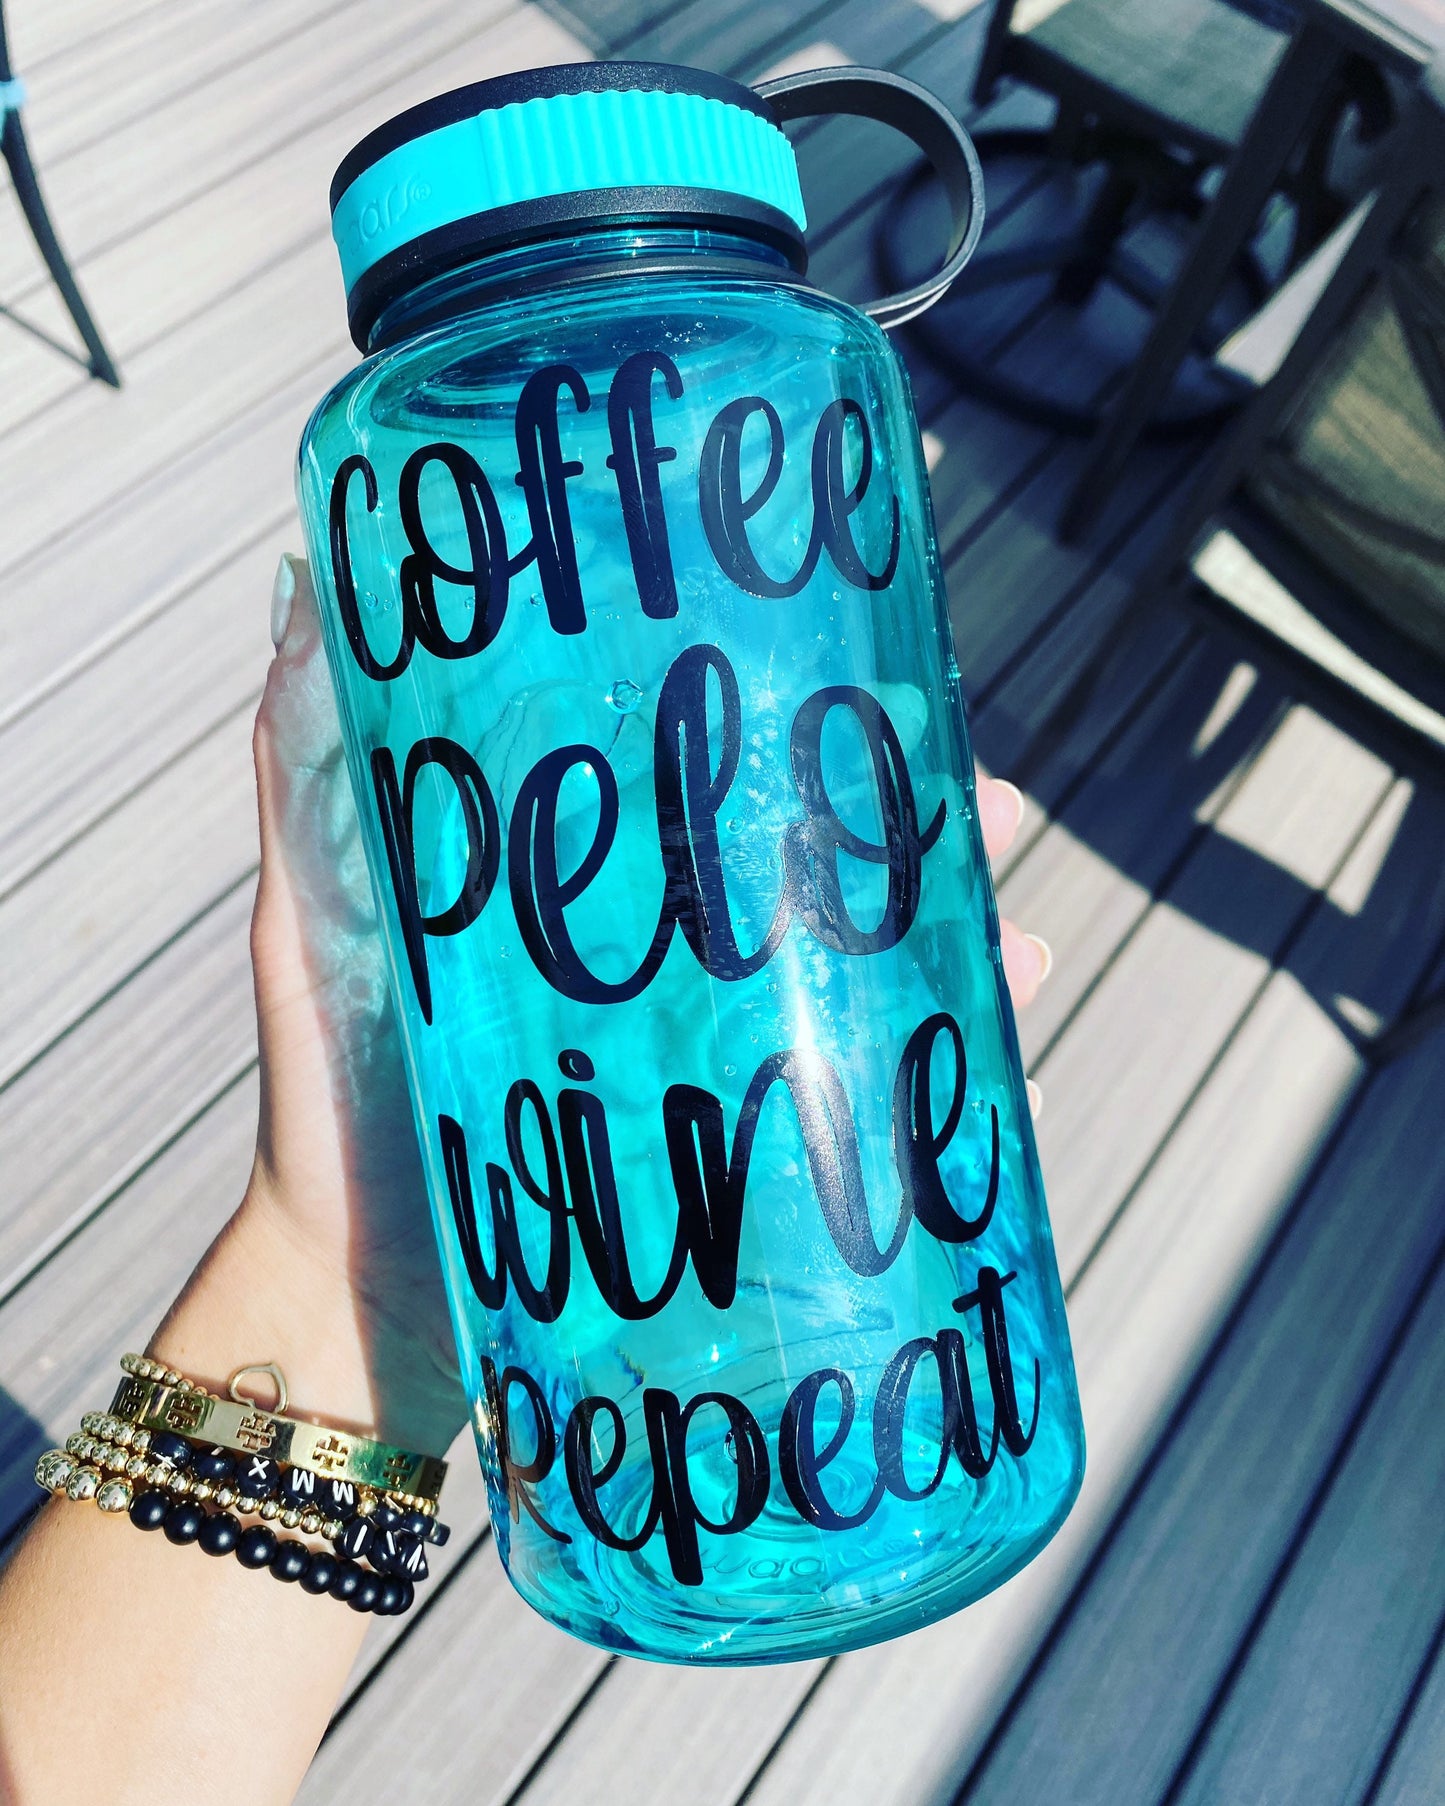 Peloton Water Bottle, Coffee and peloton, gym bottle, funny gift, gag gift